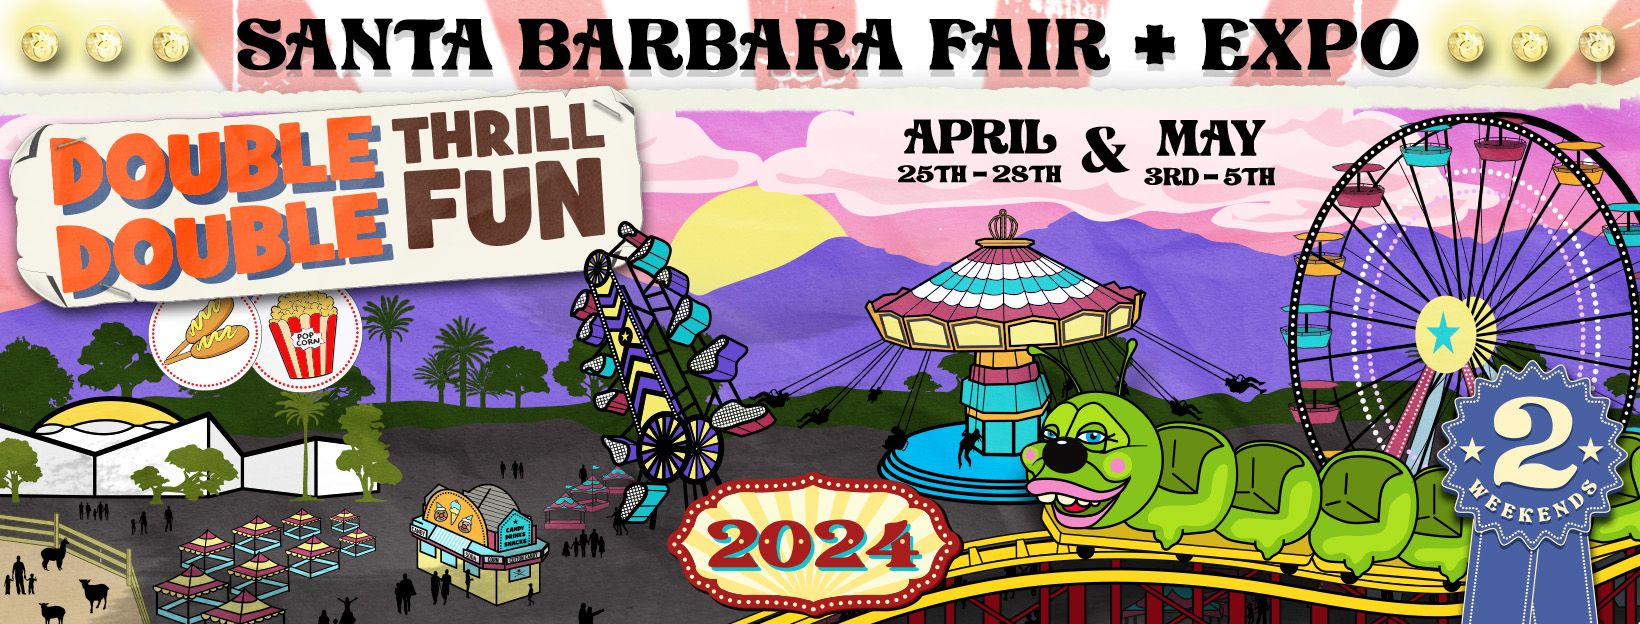 A colorful flyer for the Santa Barbara Fair & Expo, with written information and magical illustrations